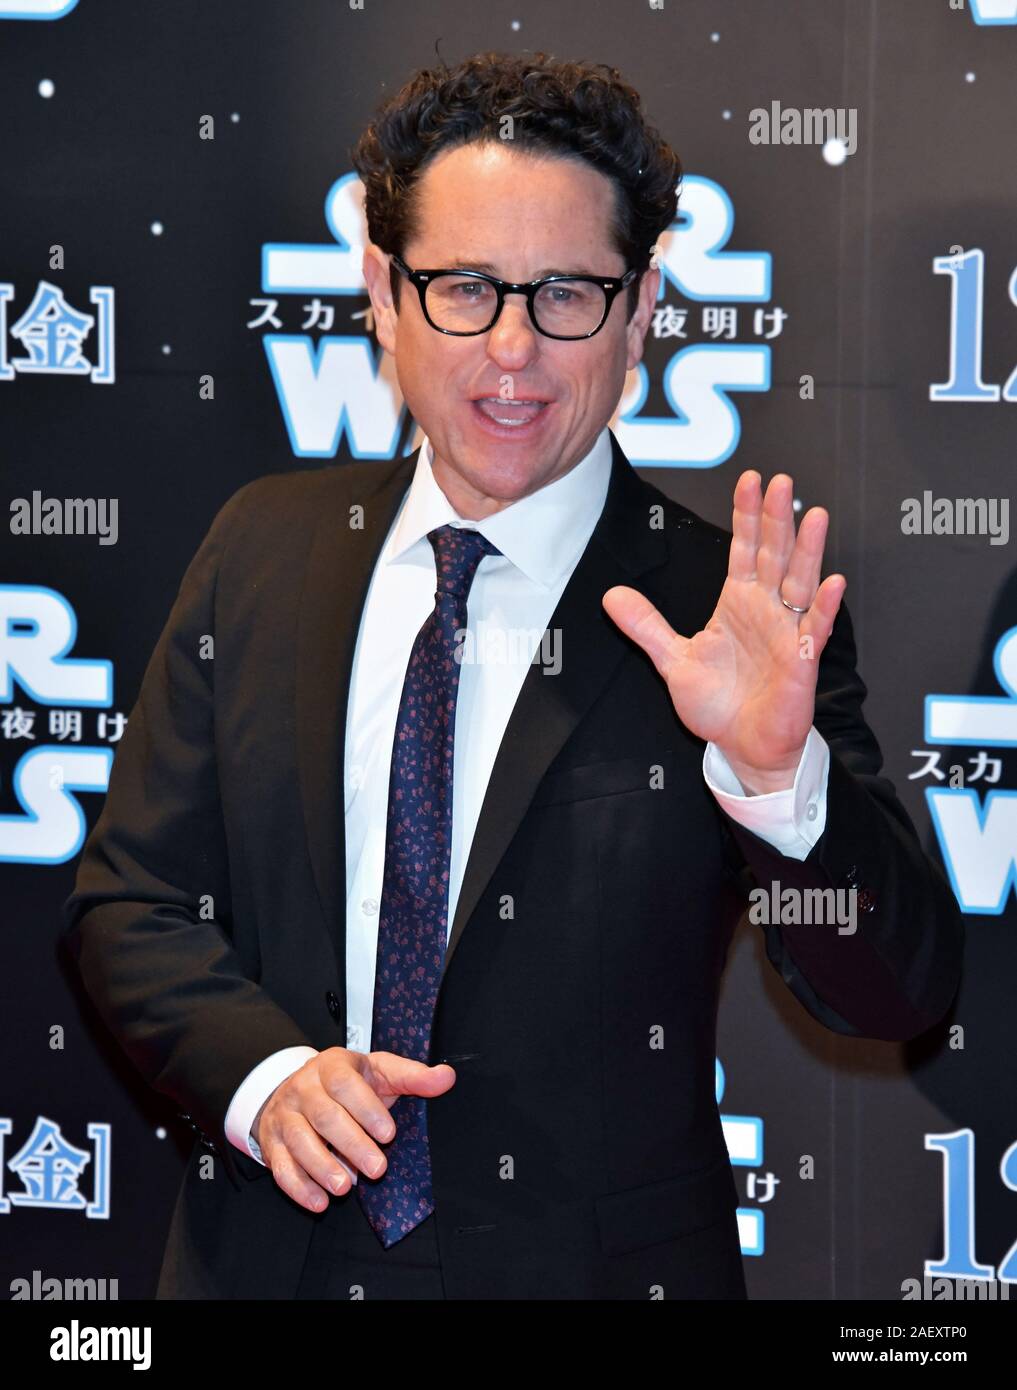 Tokyo, Japan. 11th Dec, 2019. Director J.J. Abrams attends the Japan premiere for the film 'Star Wars: The Rise of Skywalker' in Tokyo, Japan on Wednesday, December 11, 2019. This film will open on December 20th in the world. Prior to this, special screening will be held at Hokkaido, Tokyo, Aichi, Osaka and Fukuoka in Japan on December 19th. Credit: UPI/Alamy Live News Stock Photo